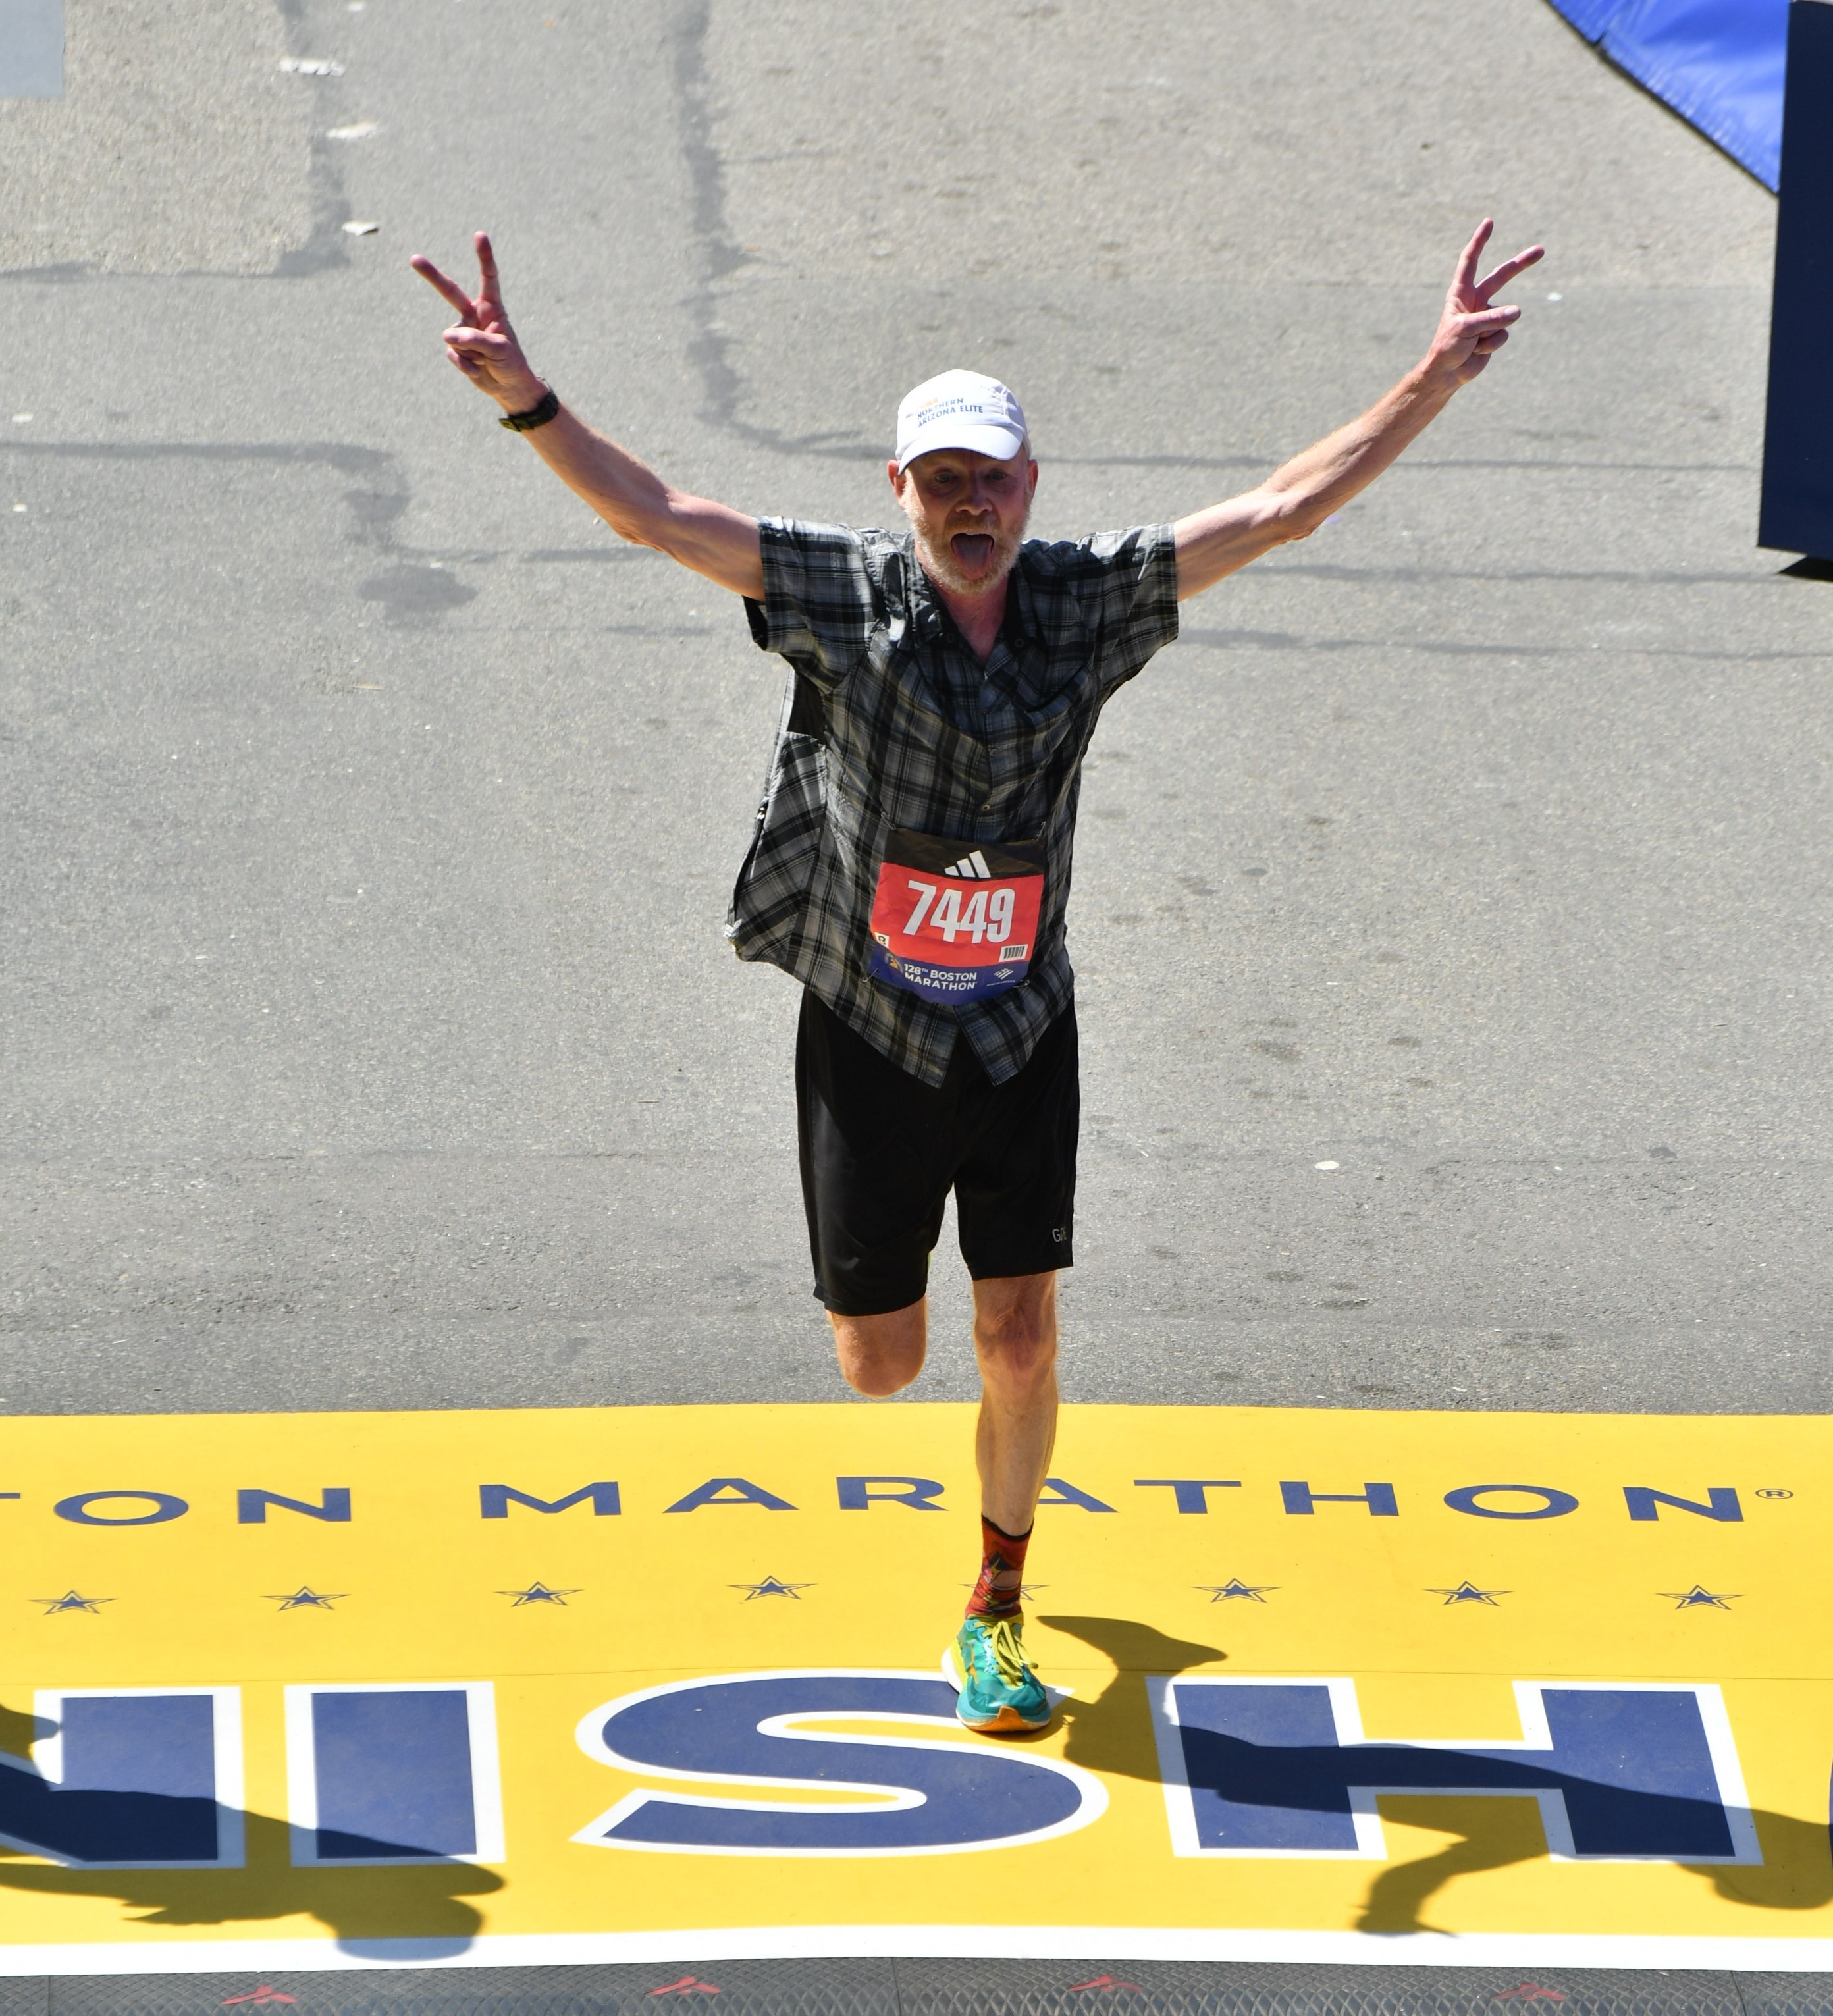 Ted MacMahon Talks About the Keys to Longevity, Running Boston Faster at 58 than 25